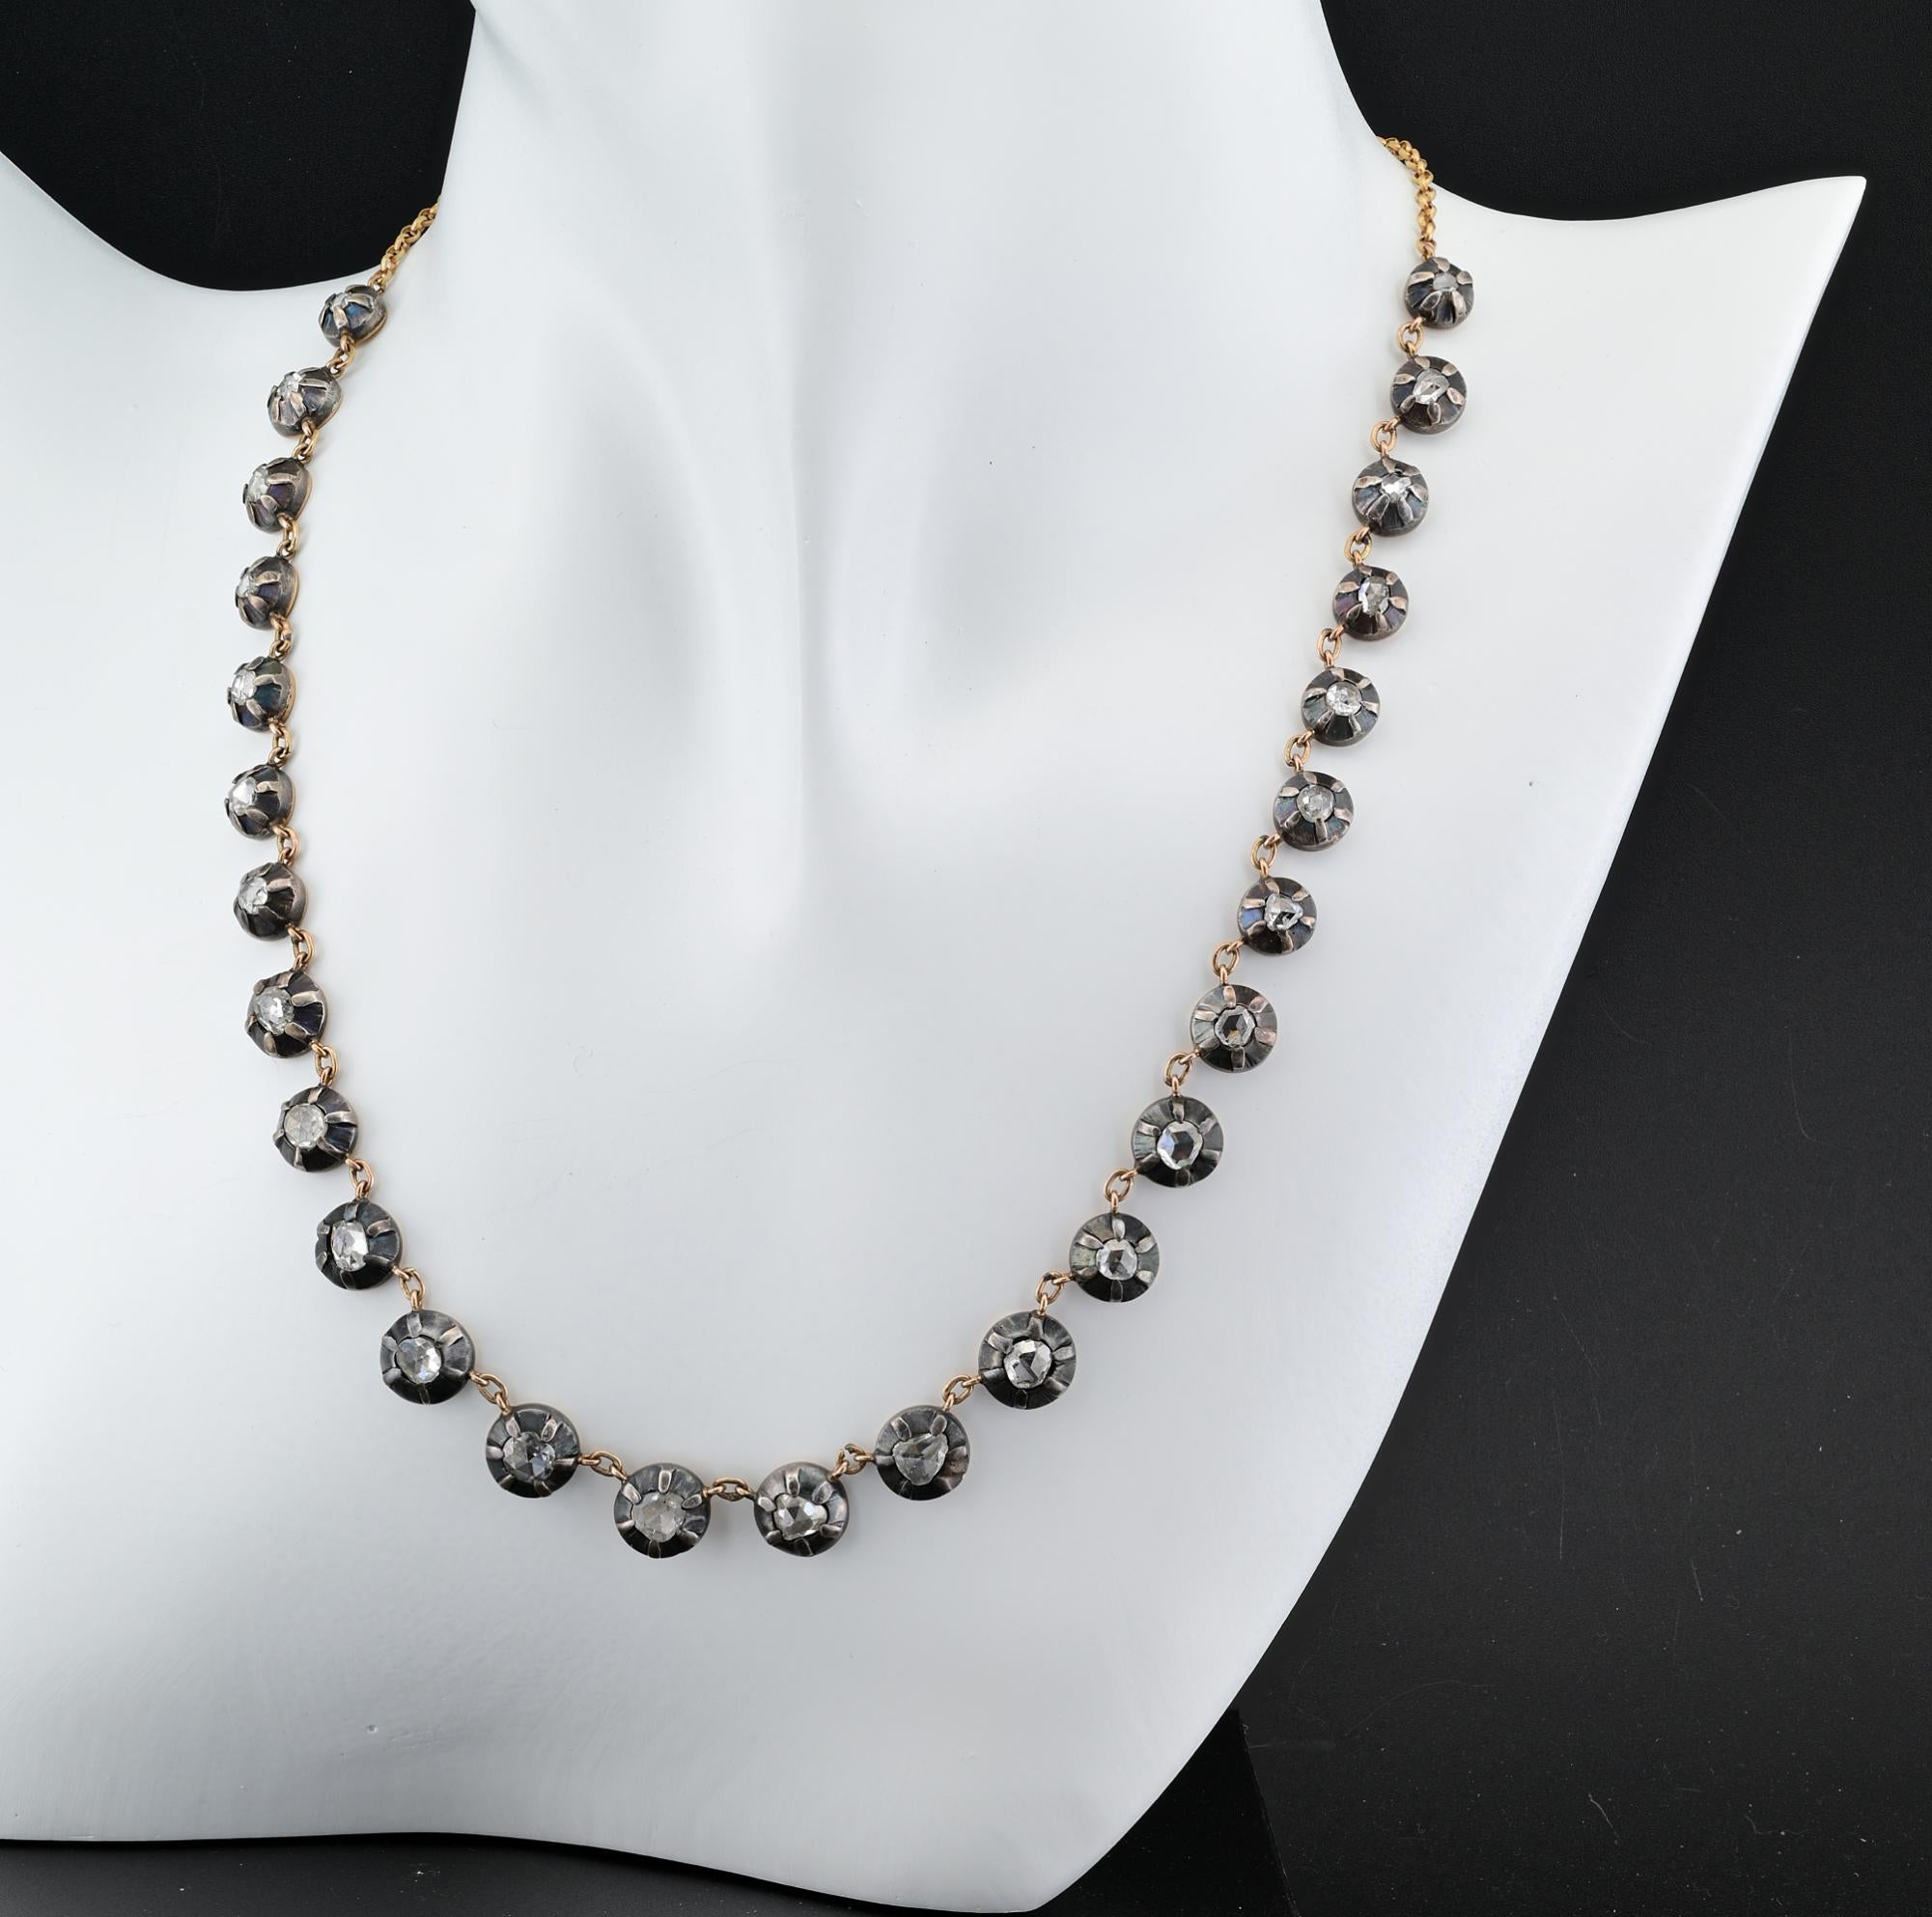 This outstanding Georgian Style necklace has been hand crafted of solid 18 KT gold and silver
A full line of  Rose cut Diamonds set in the Georgian manner graduated in size from bigger standing in the middle point chasing down in sizes
There are 26